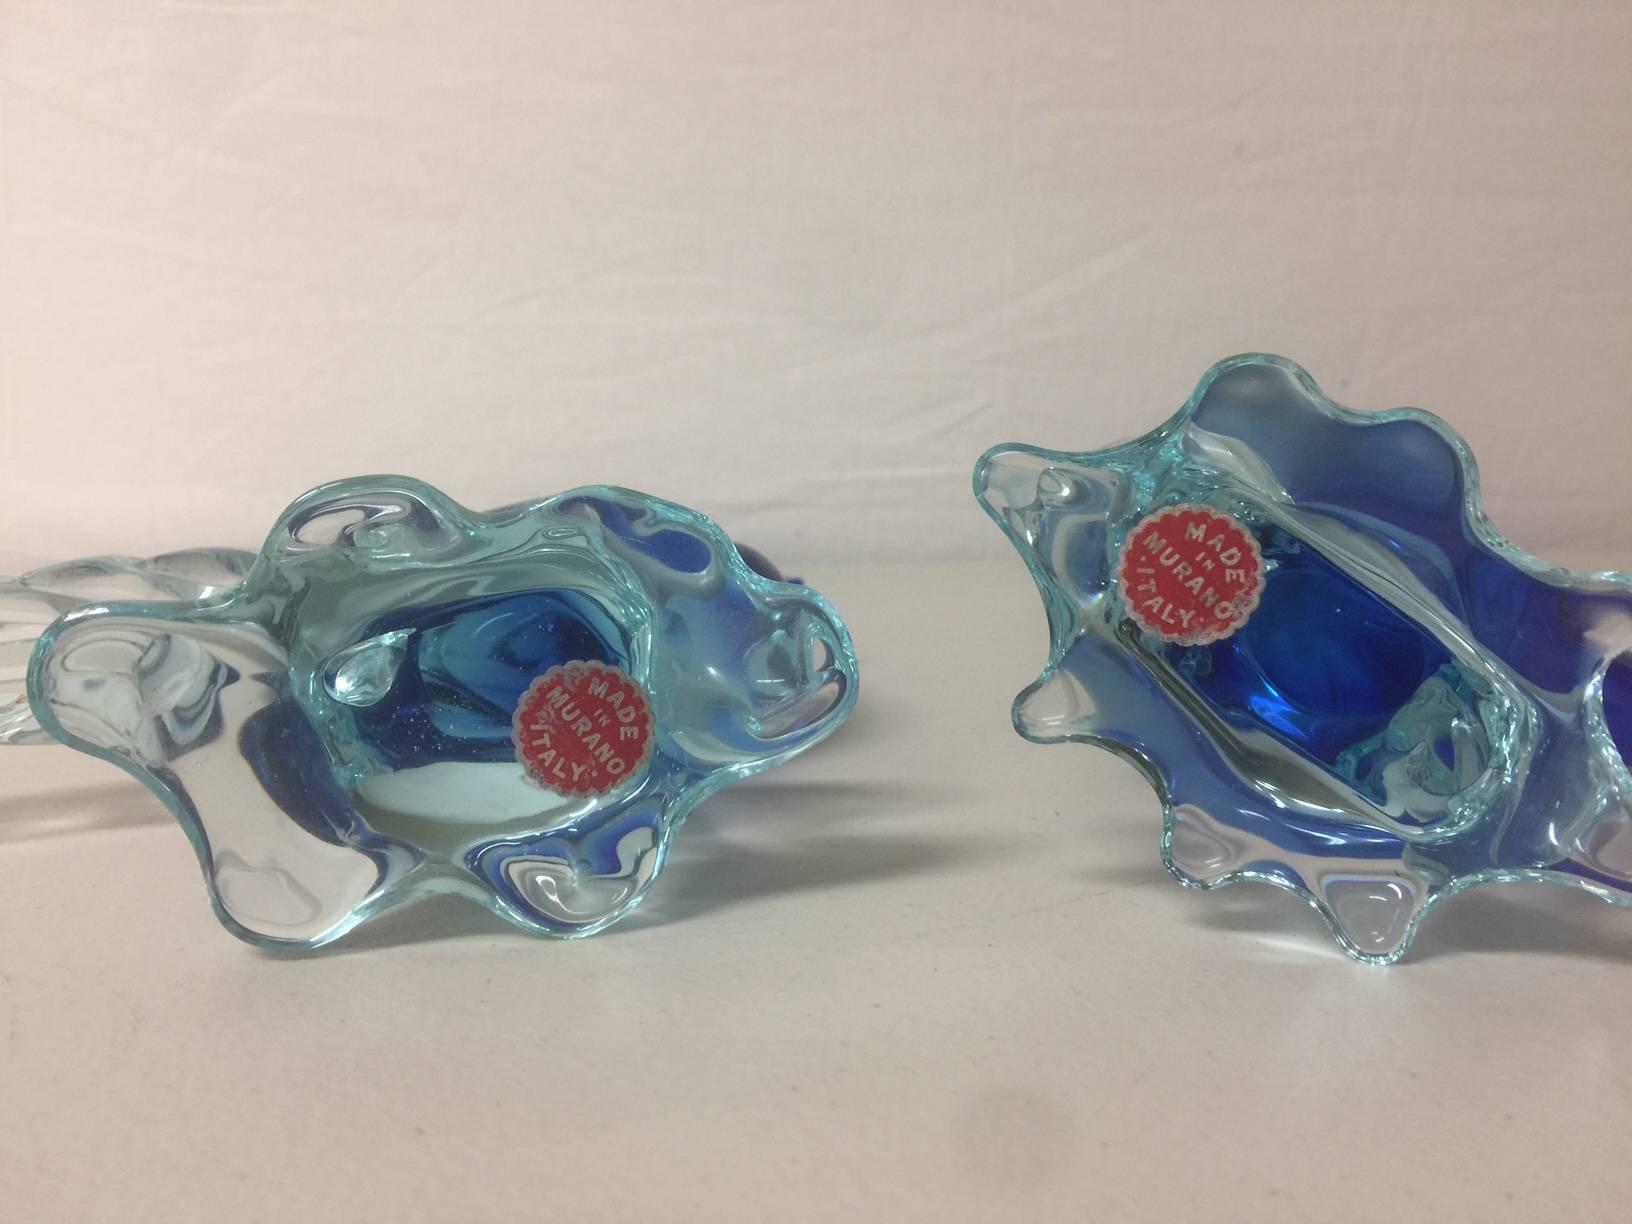 Pair of Sommerso Art Glass Birds/Pheasants by Murano Glass Studios 2